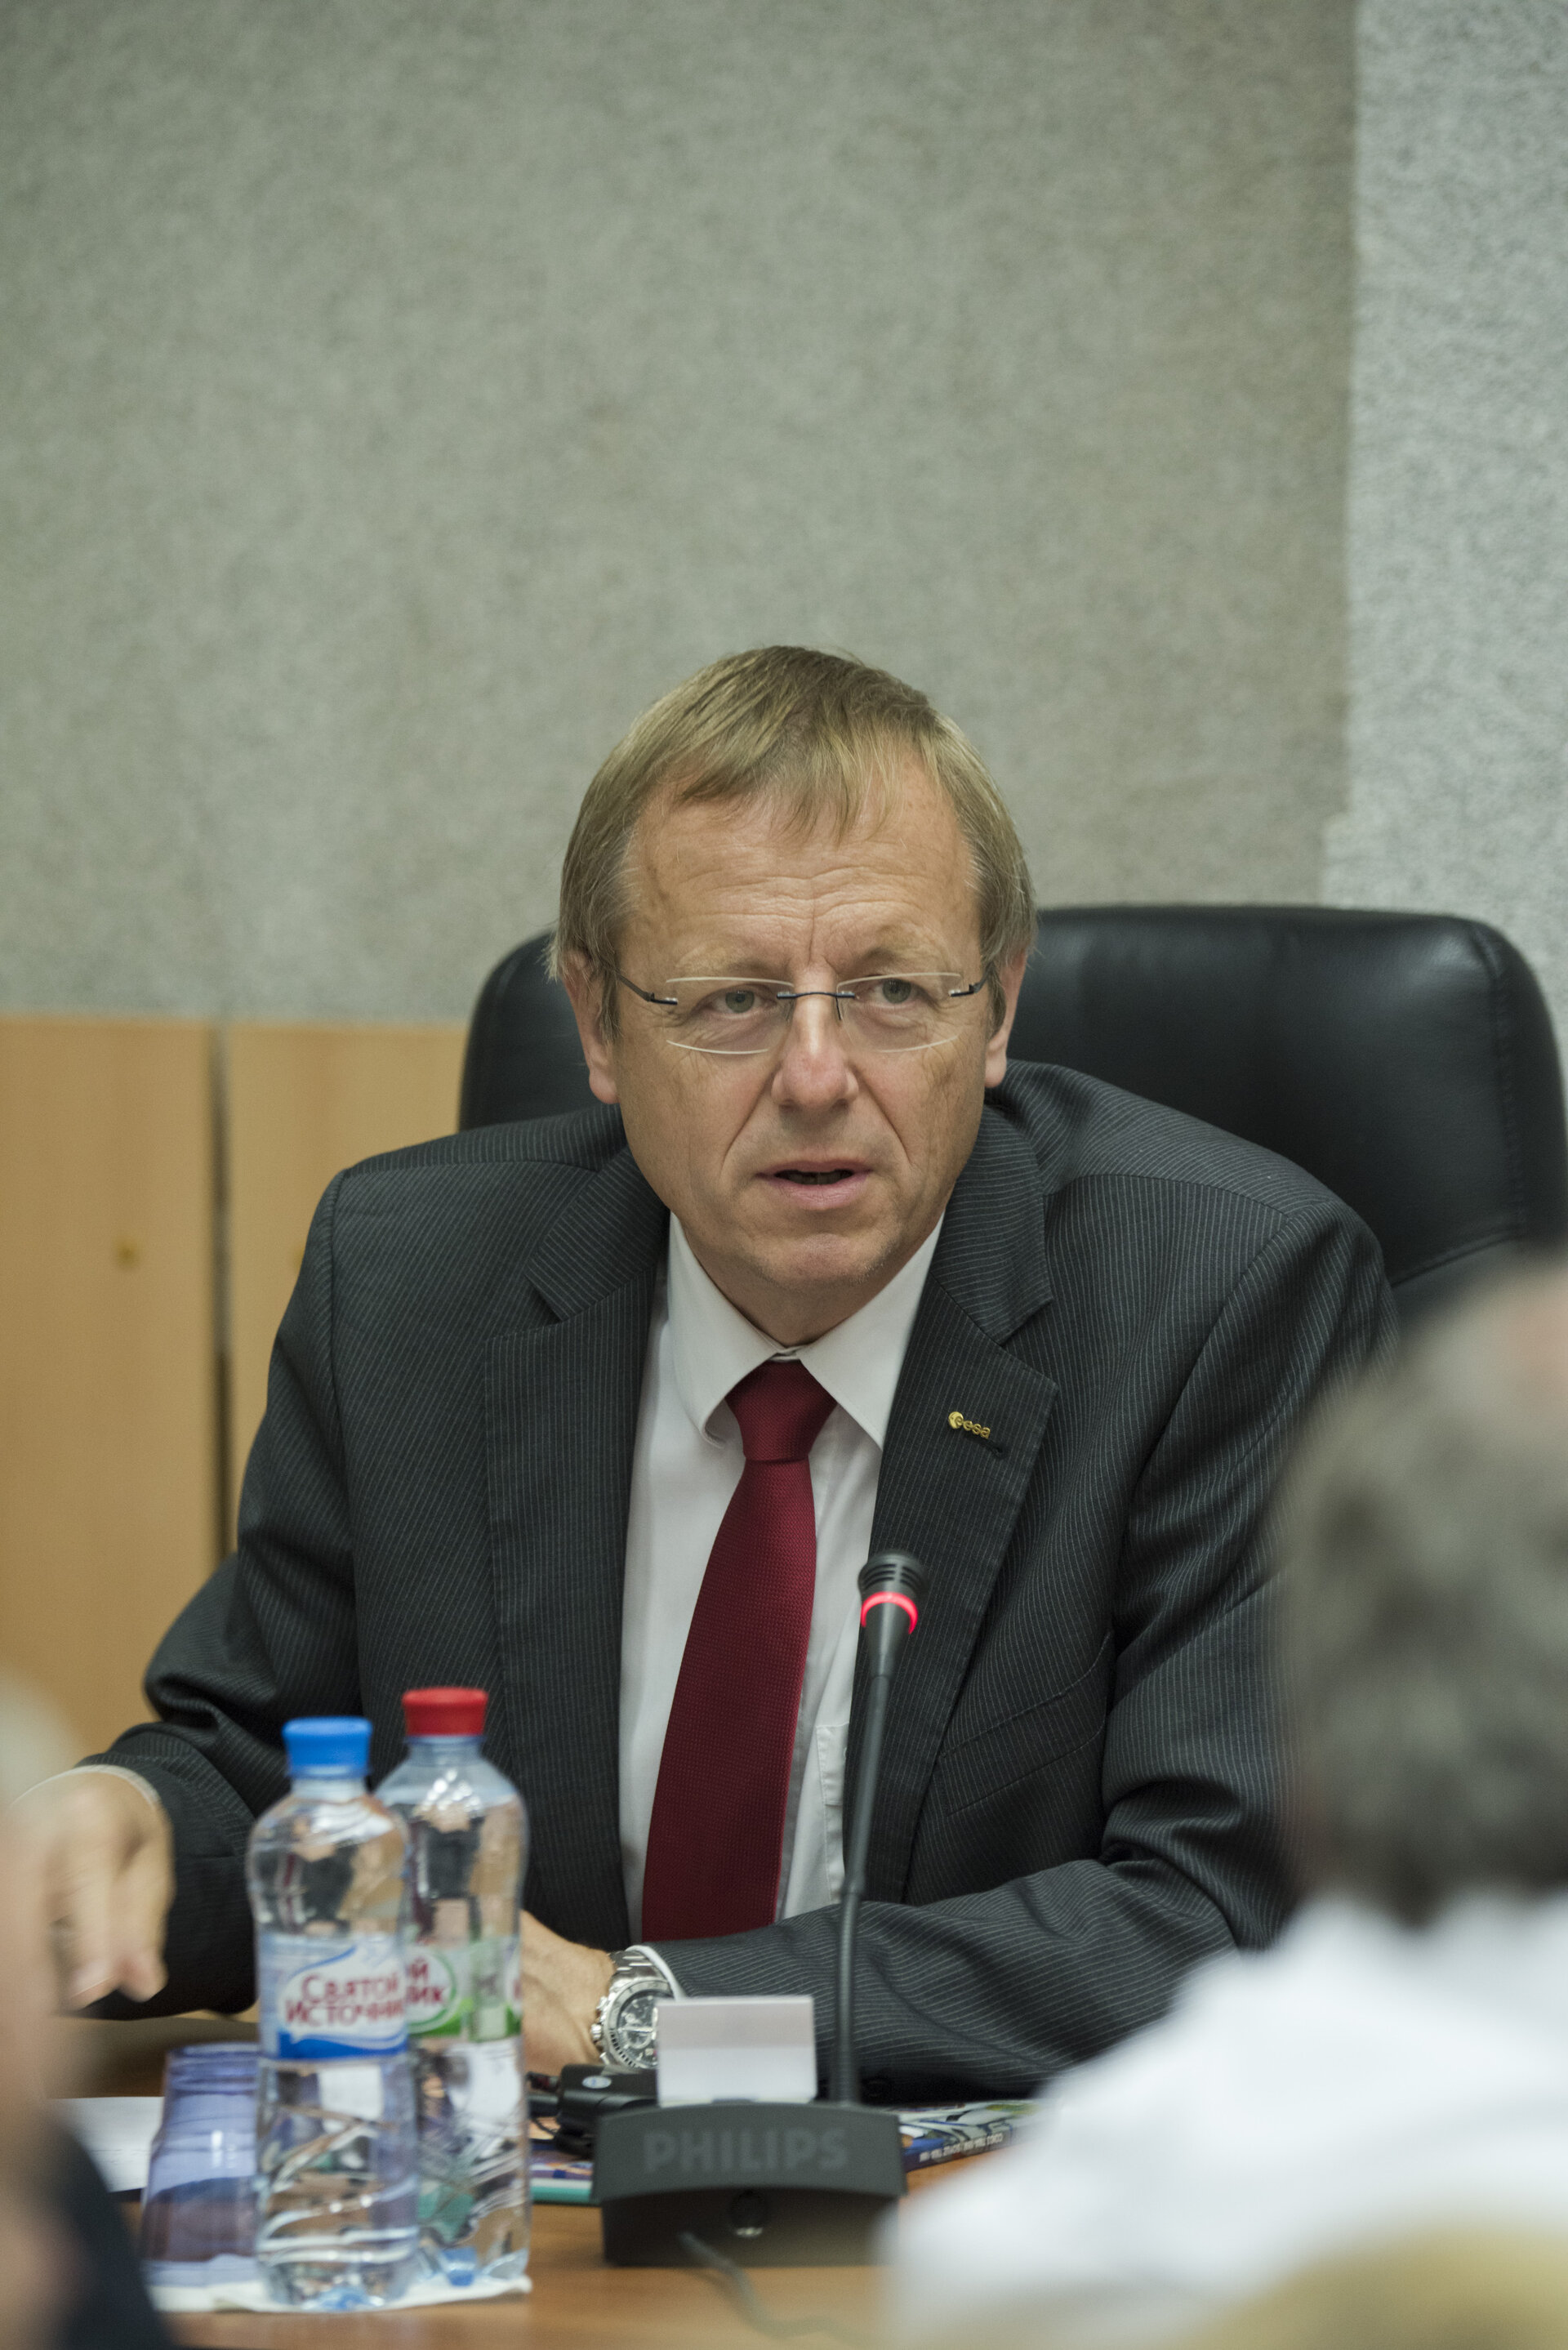 Jan Wörner during the State Commission meeting to approve the Soyuz launch